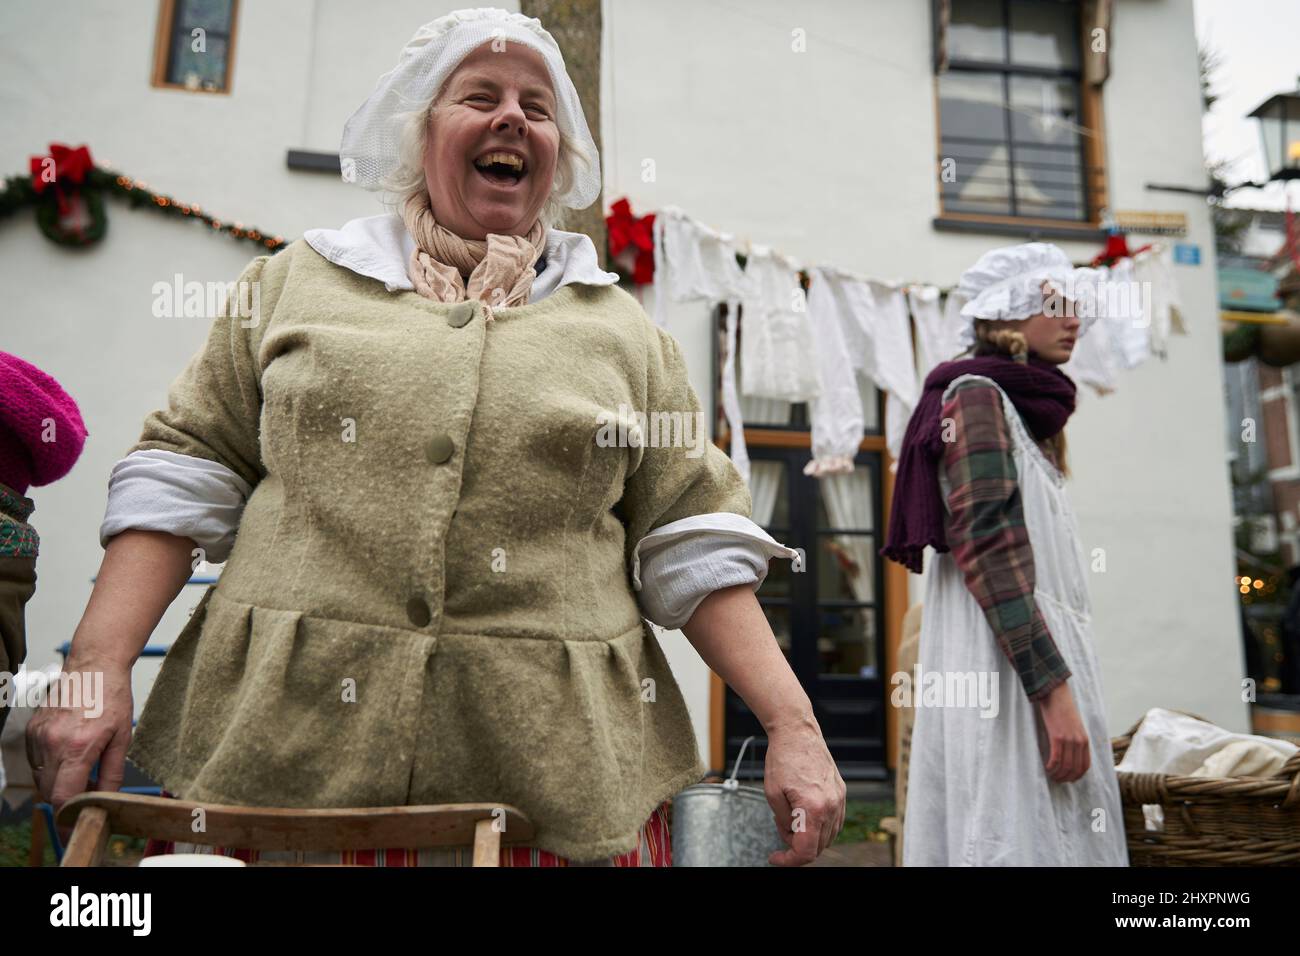 A woman participates in the event together with a group of girls disguised as laundresses Stock Photo